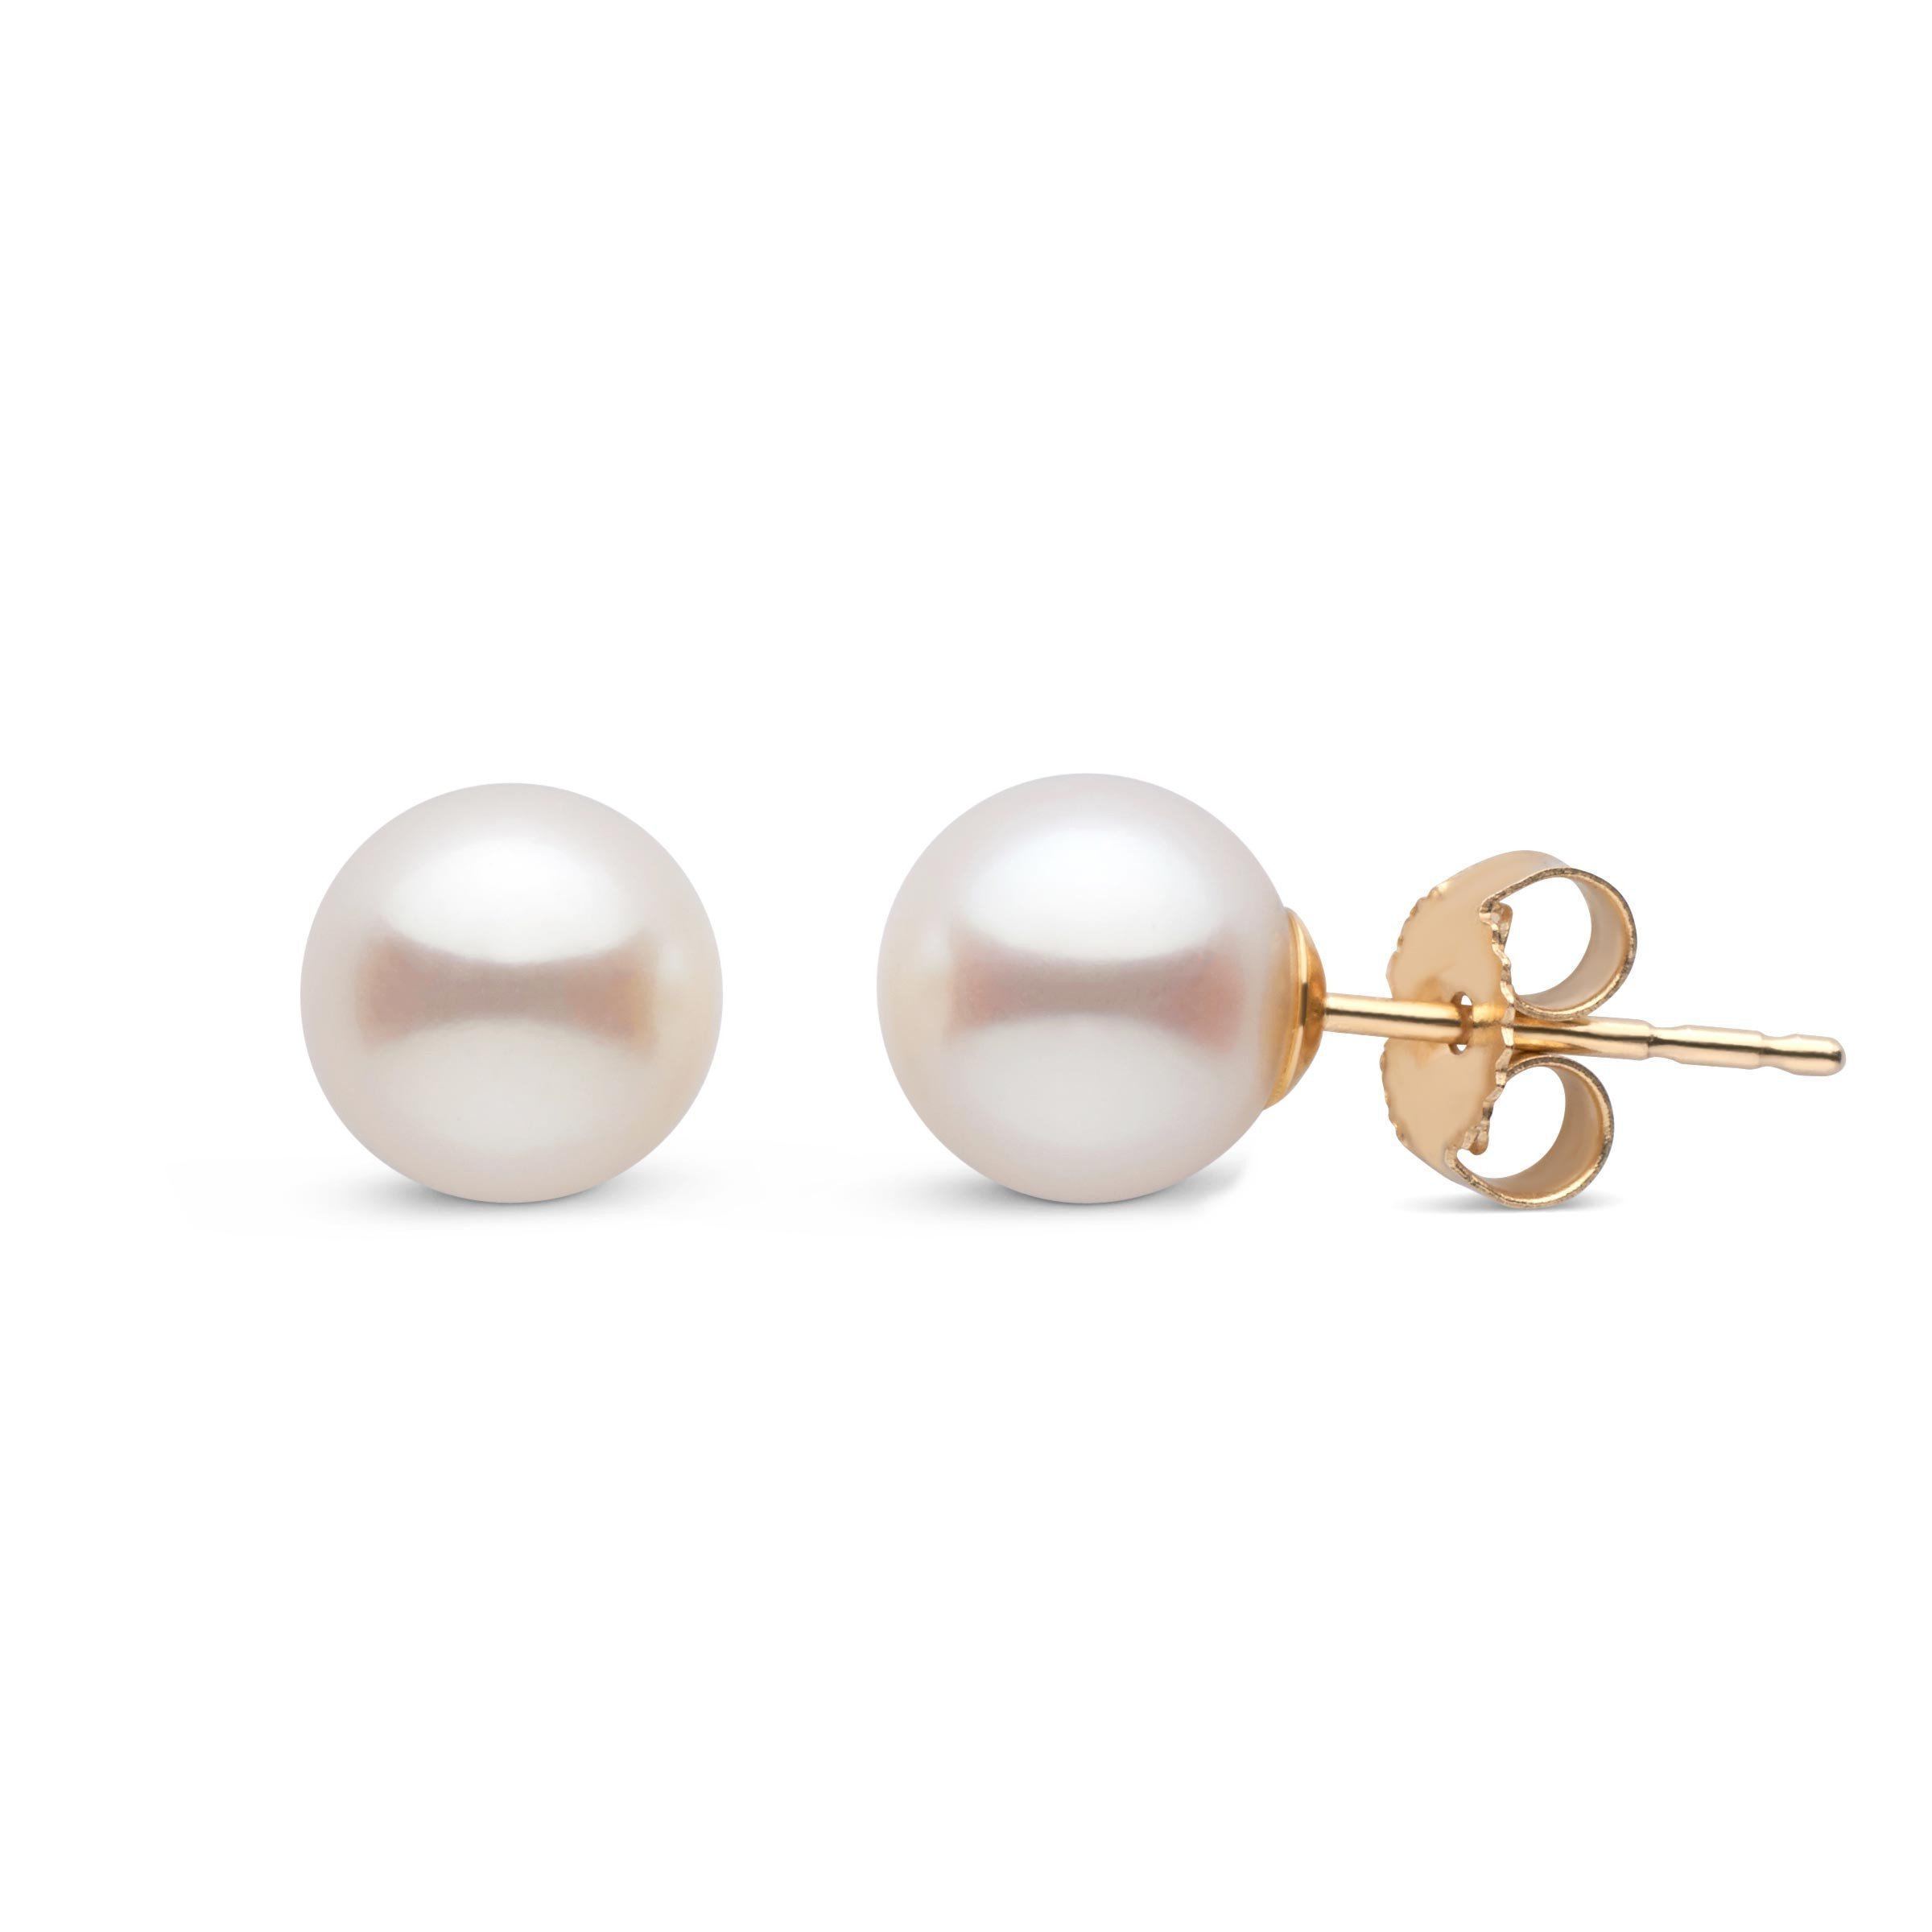 6.5-7.0 mm AAA White Freshwater Pearl Stud Earrings 14K White Gold by Pearl Paradise